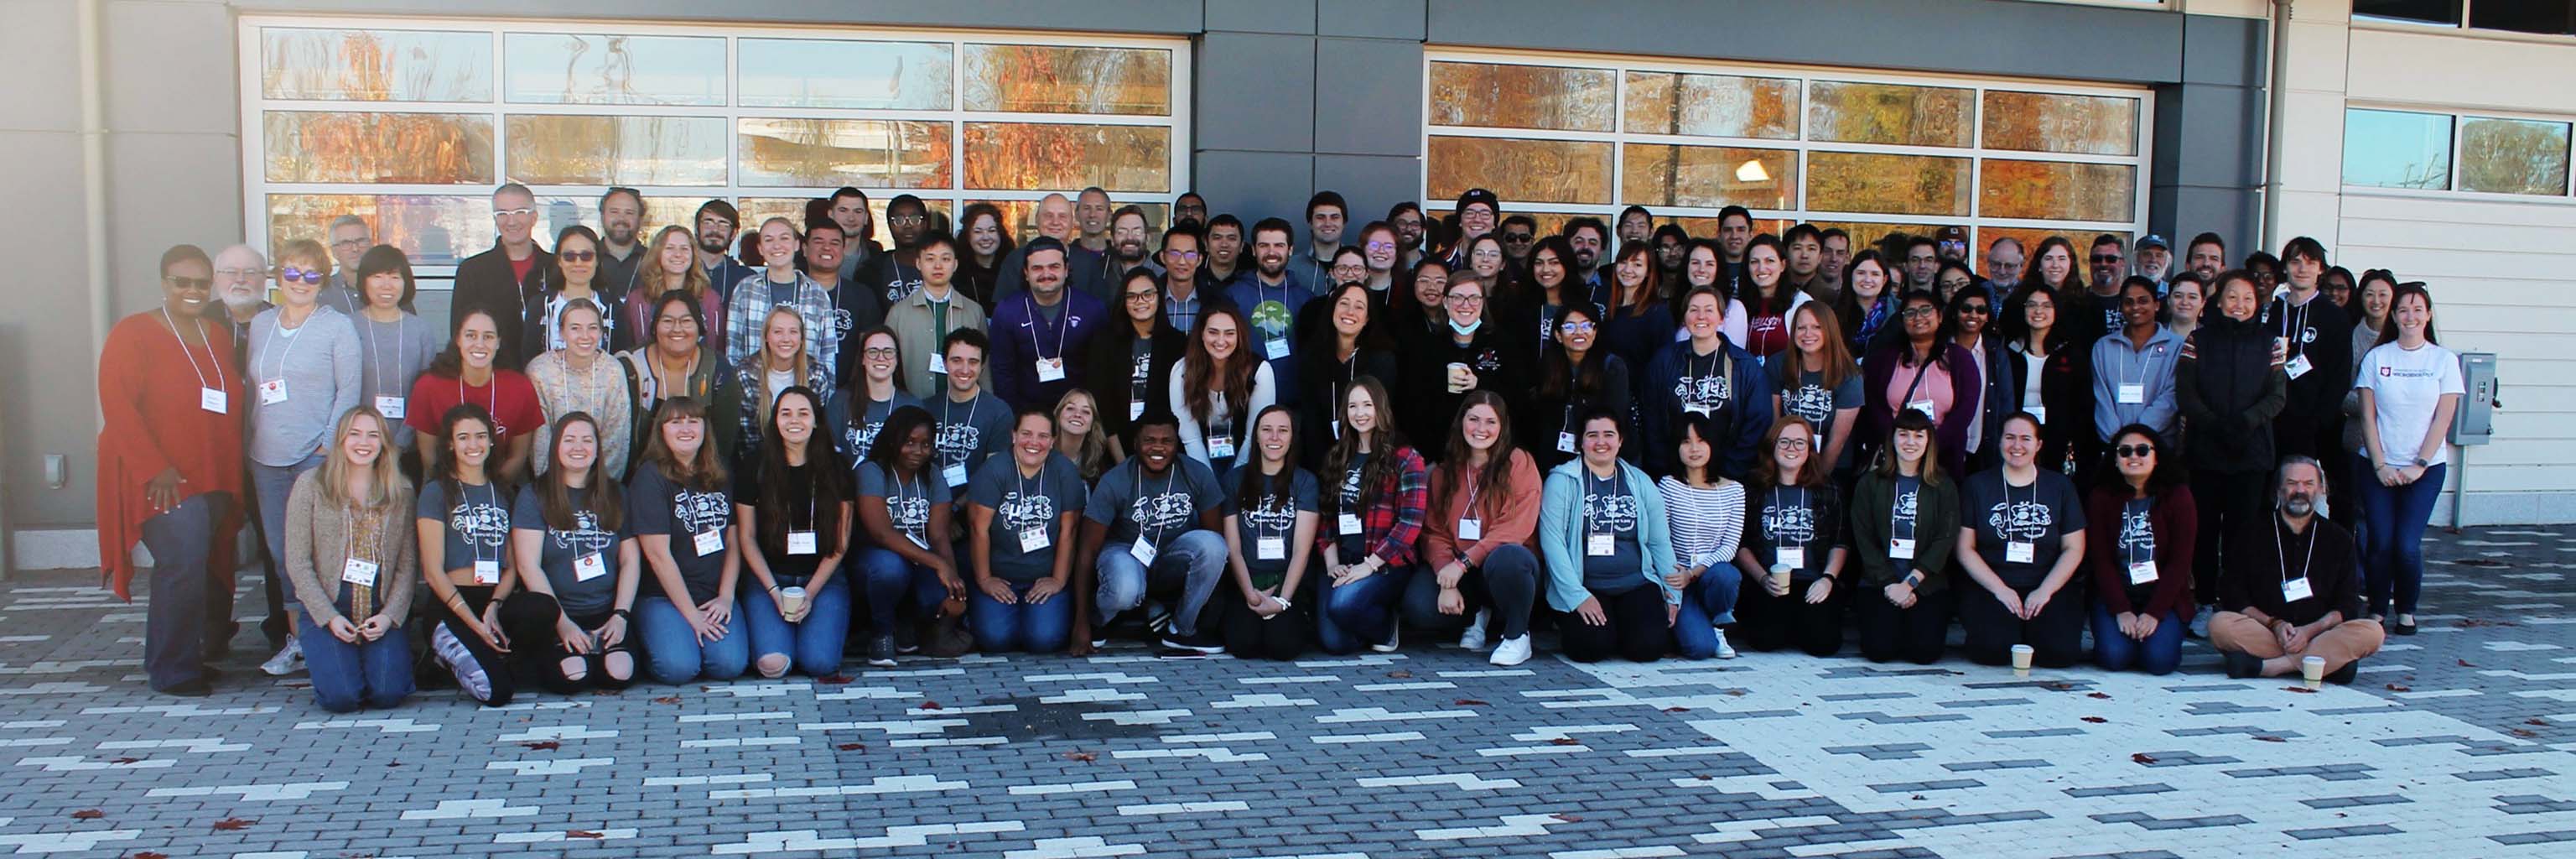 Students, faculty, and staff gather for a group photo during the Annual Micro Retreat on October 29, 2022, at Switchyard Park Pavilion in Bloomington, IN.